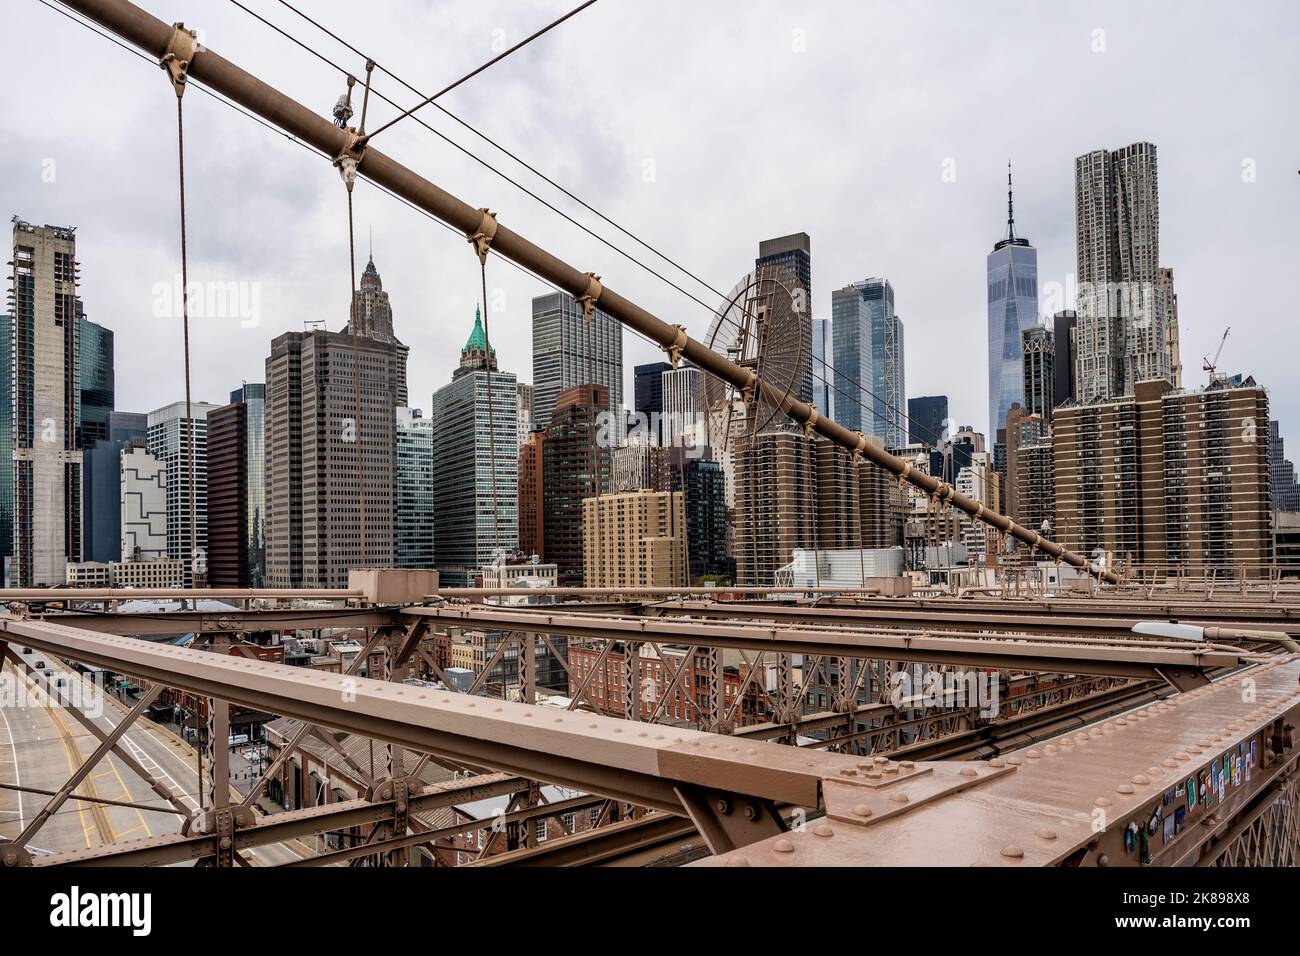 Lower Manhattan seen from the Brooklyn Bridge, New York City, with ropes in foreground Stock Photo